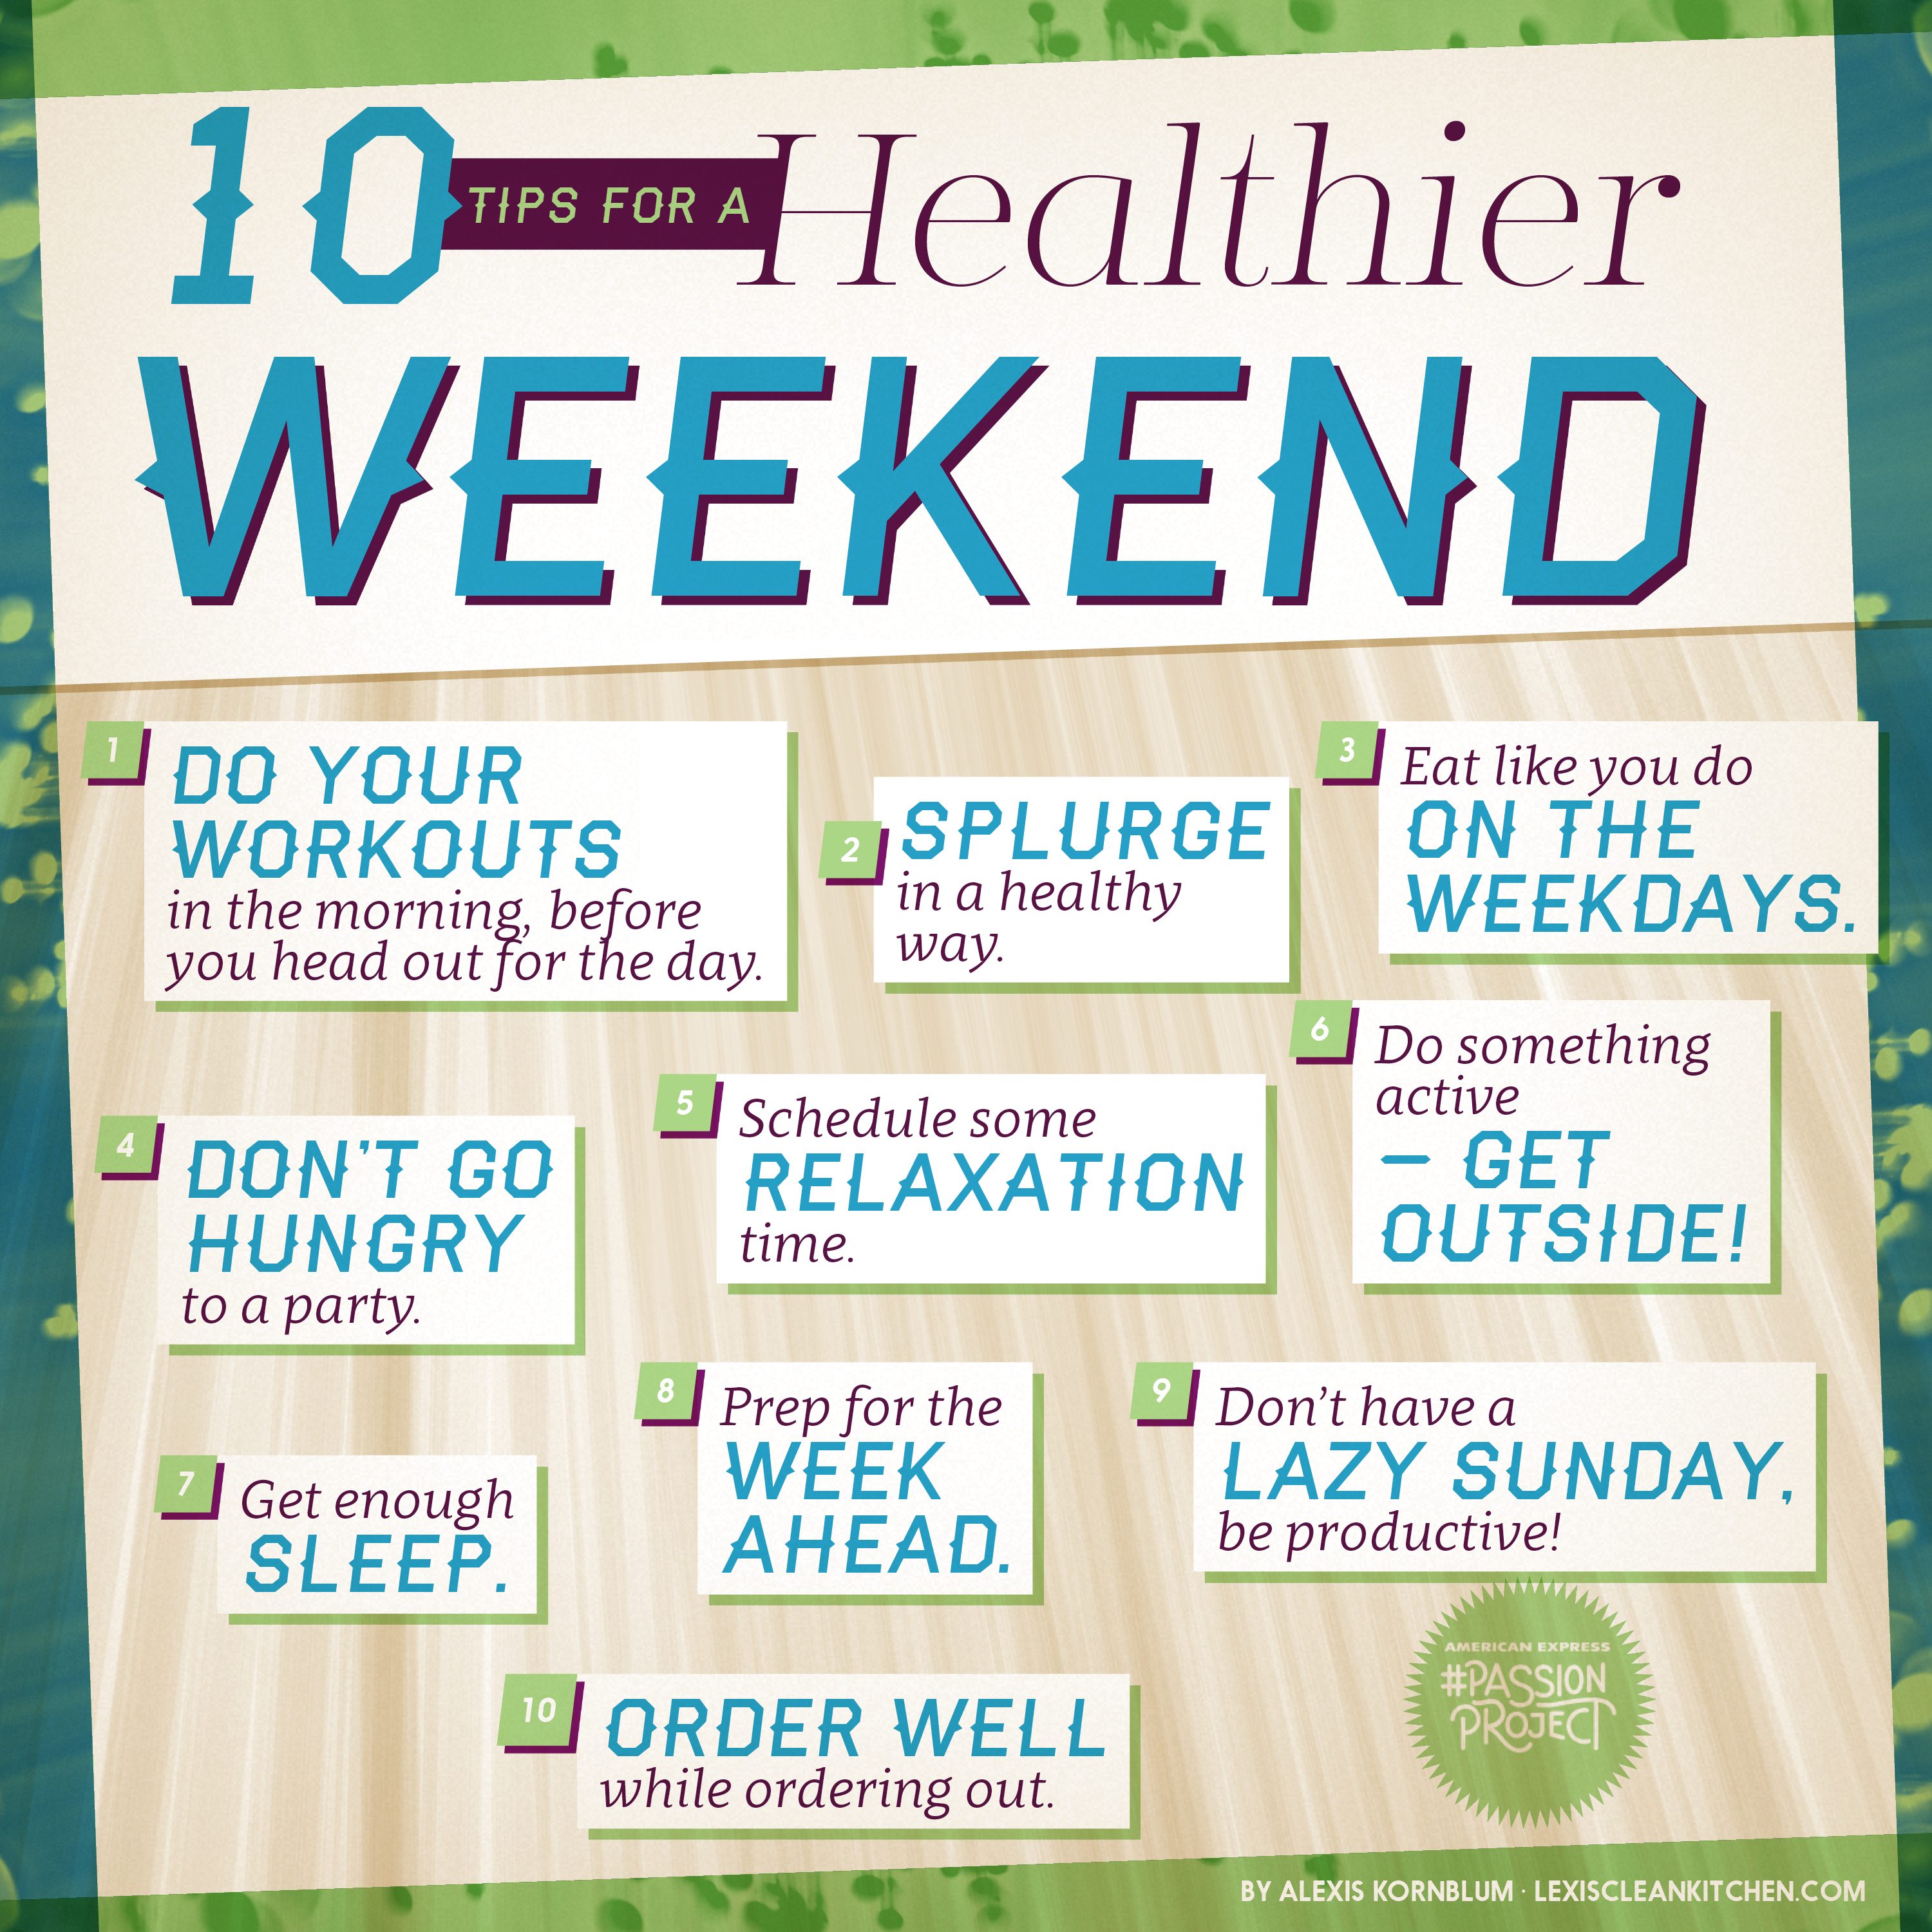 10 Tips for a Healthier Weekend